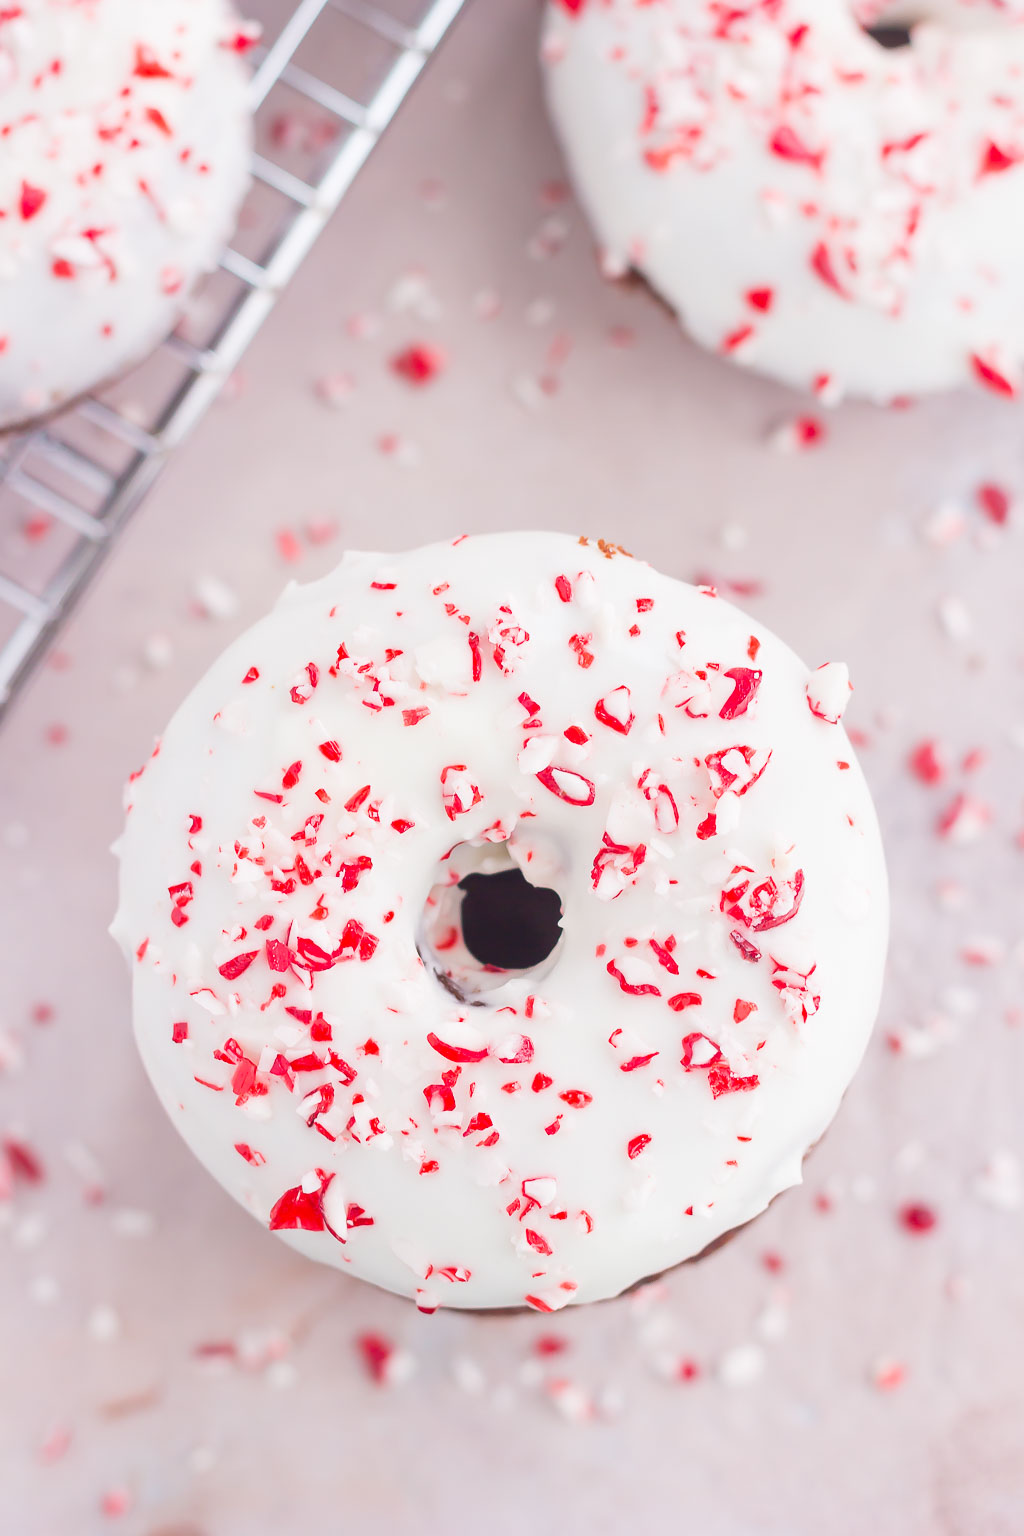 Peppermint Chocolate Iced Donuts - Pumpkin 'N Spice